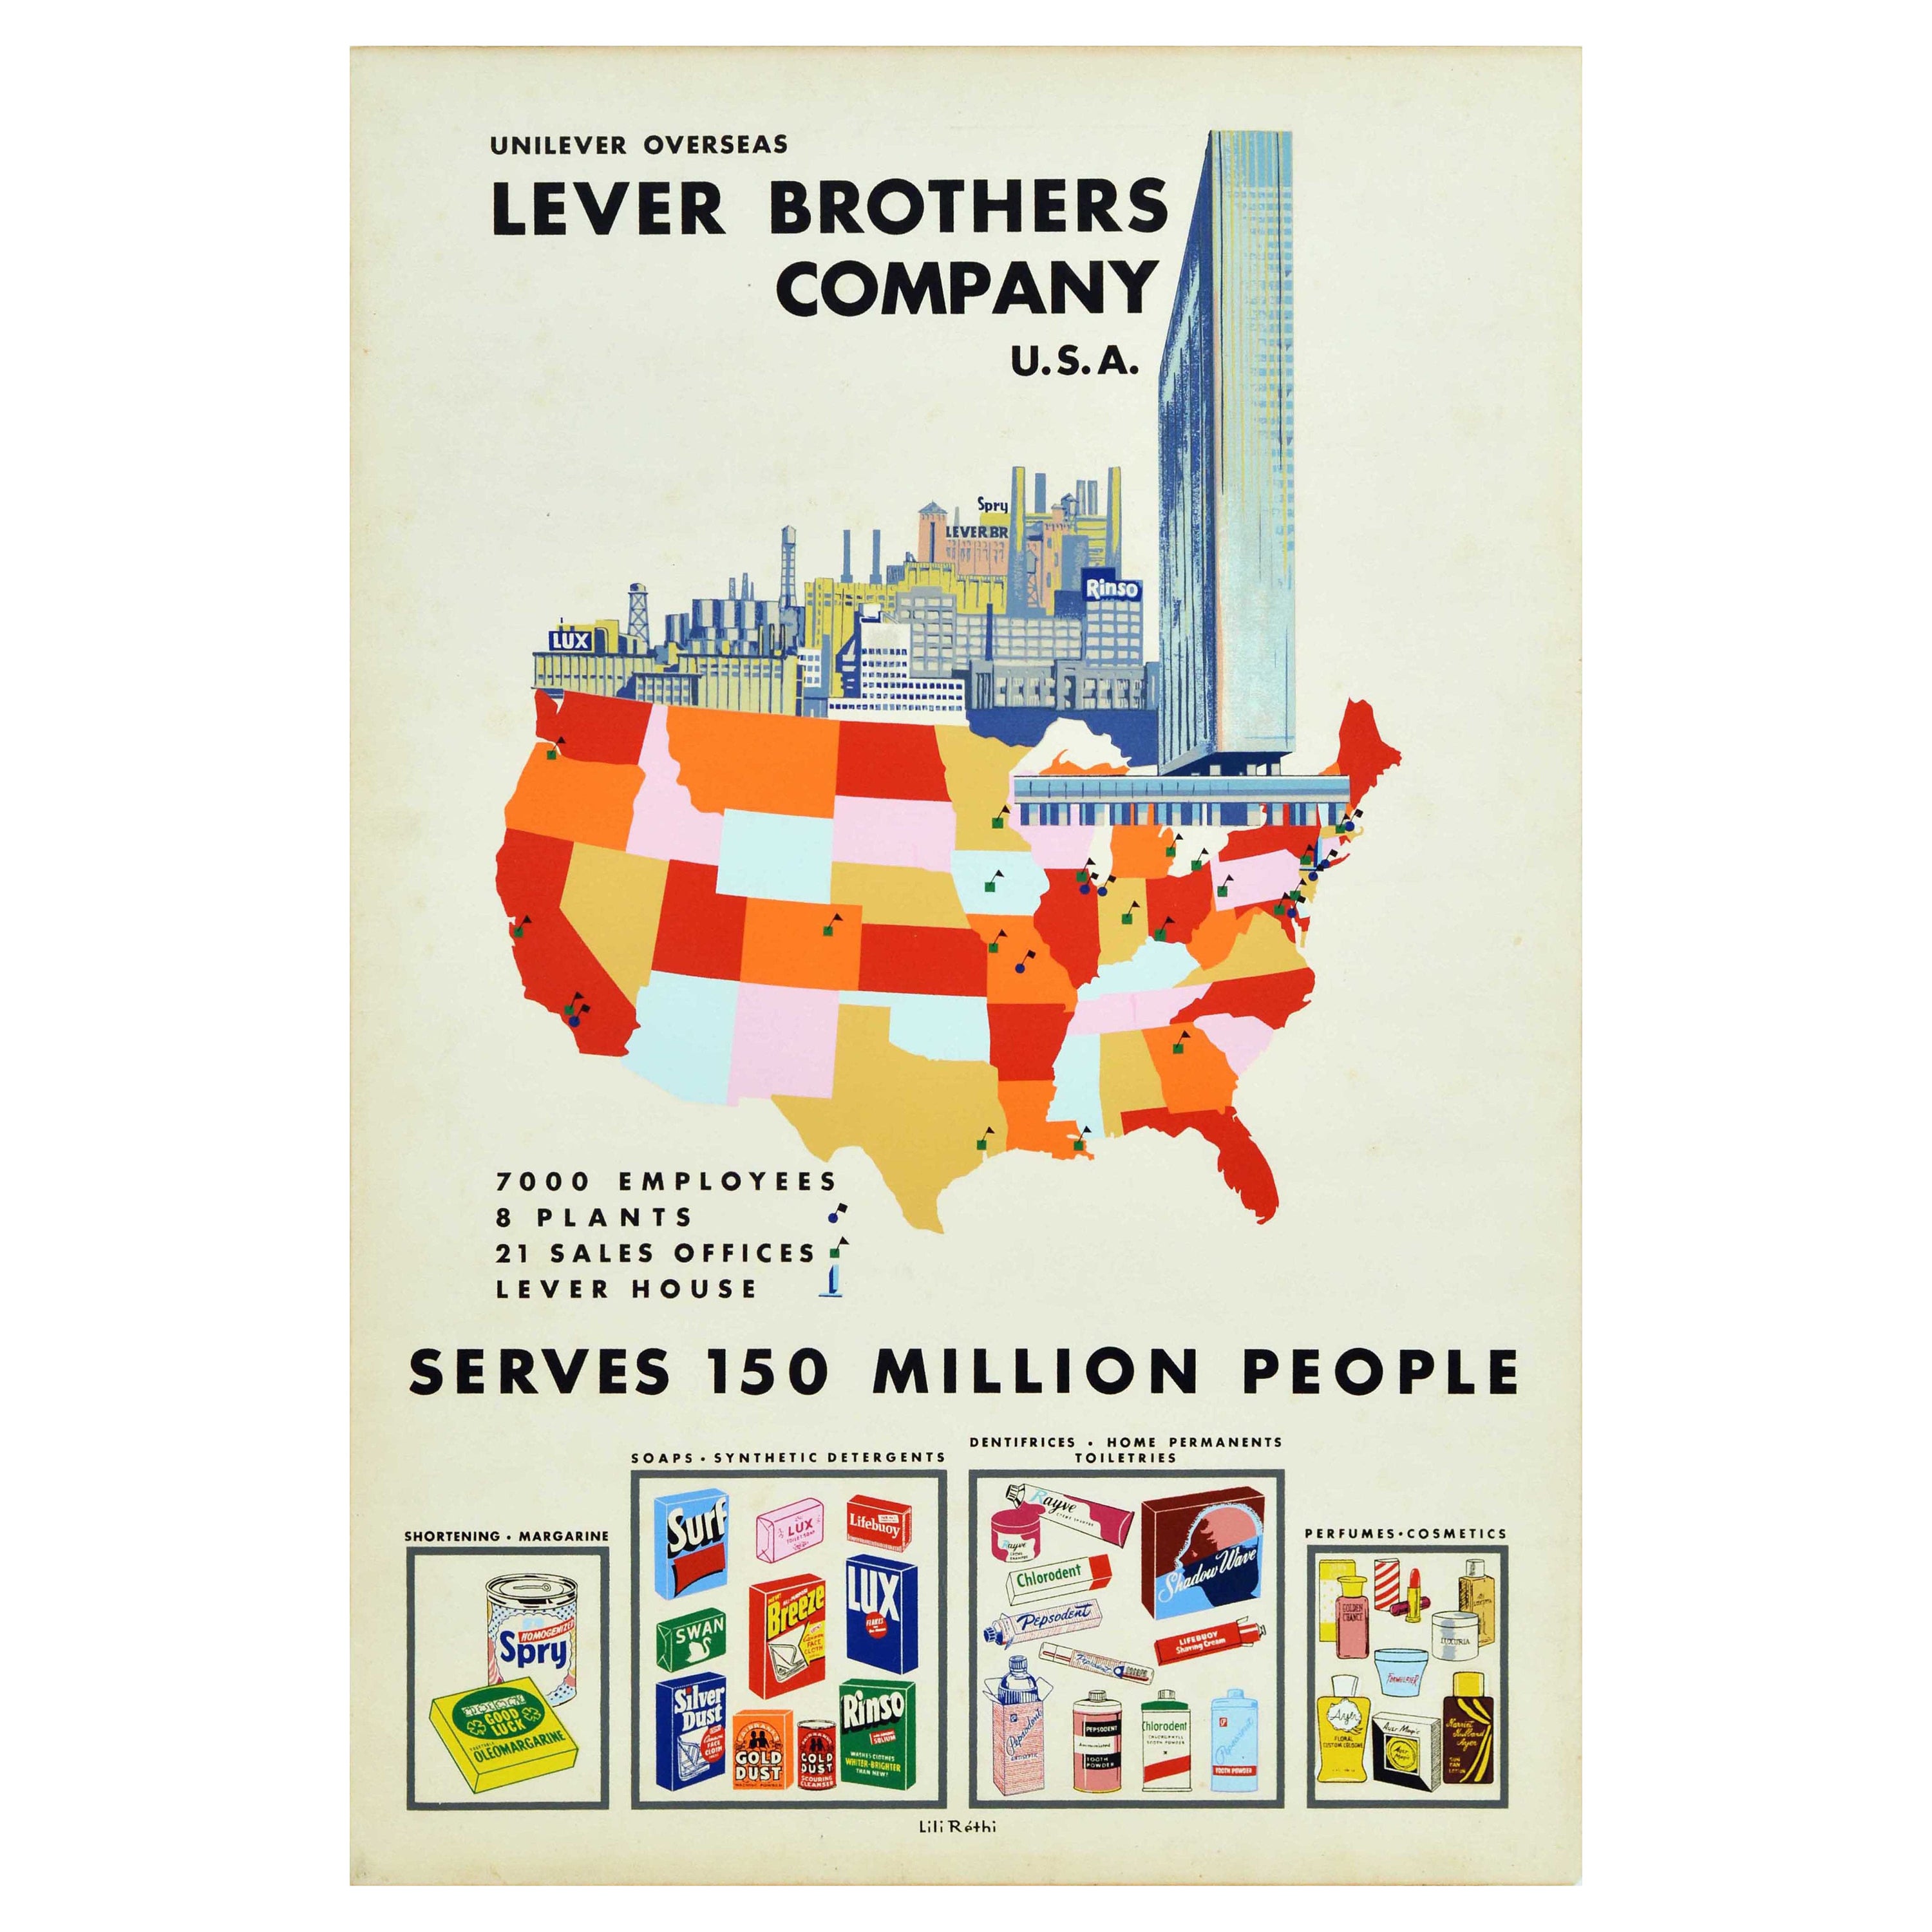 Original Vintage Advertising Poster Unilever Overseas Lever Brothers Company